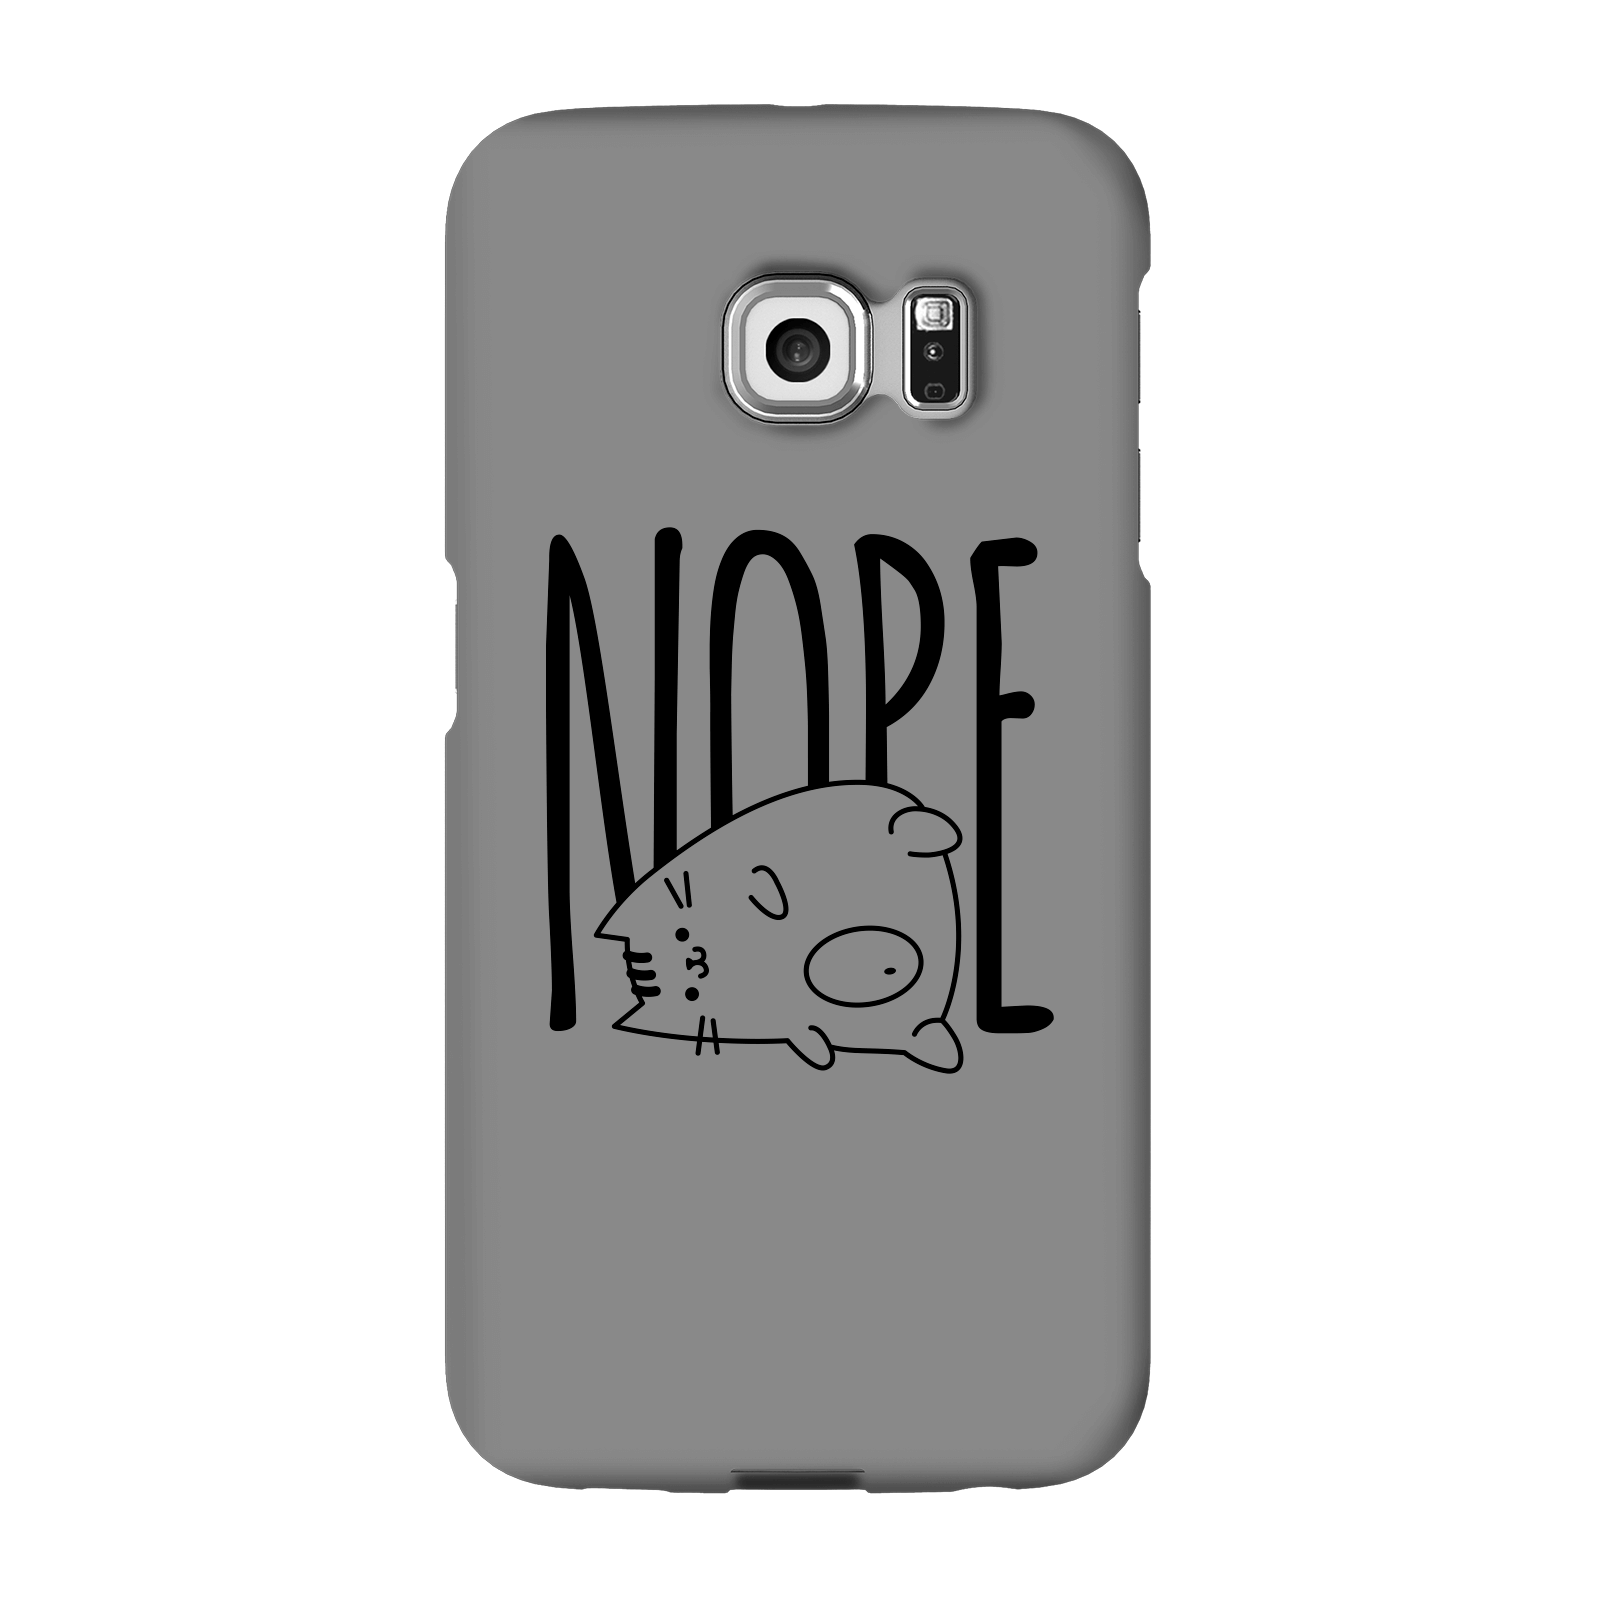 Nope Phone Case for iPhone and Android - Samsung S6 Edge - Snap Case - Gloss